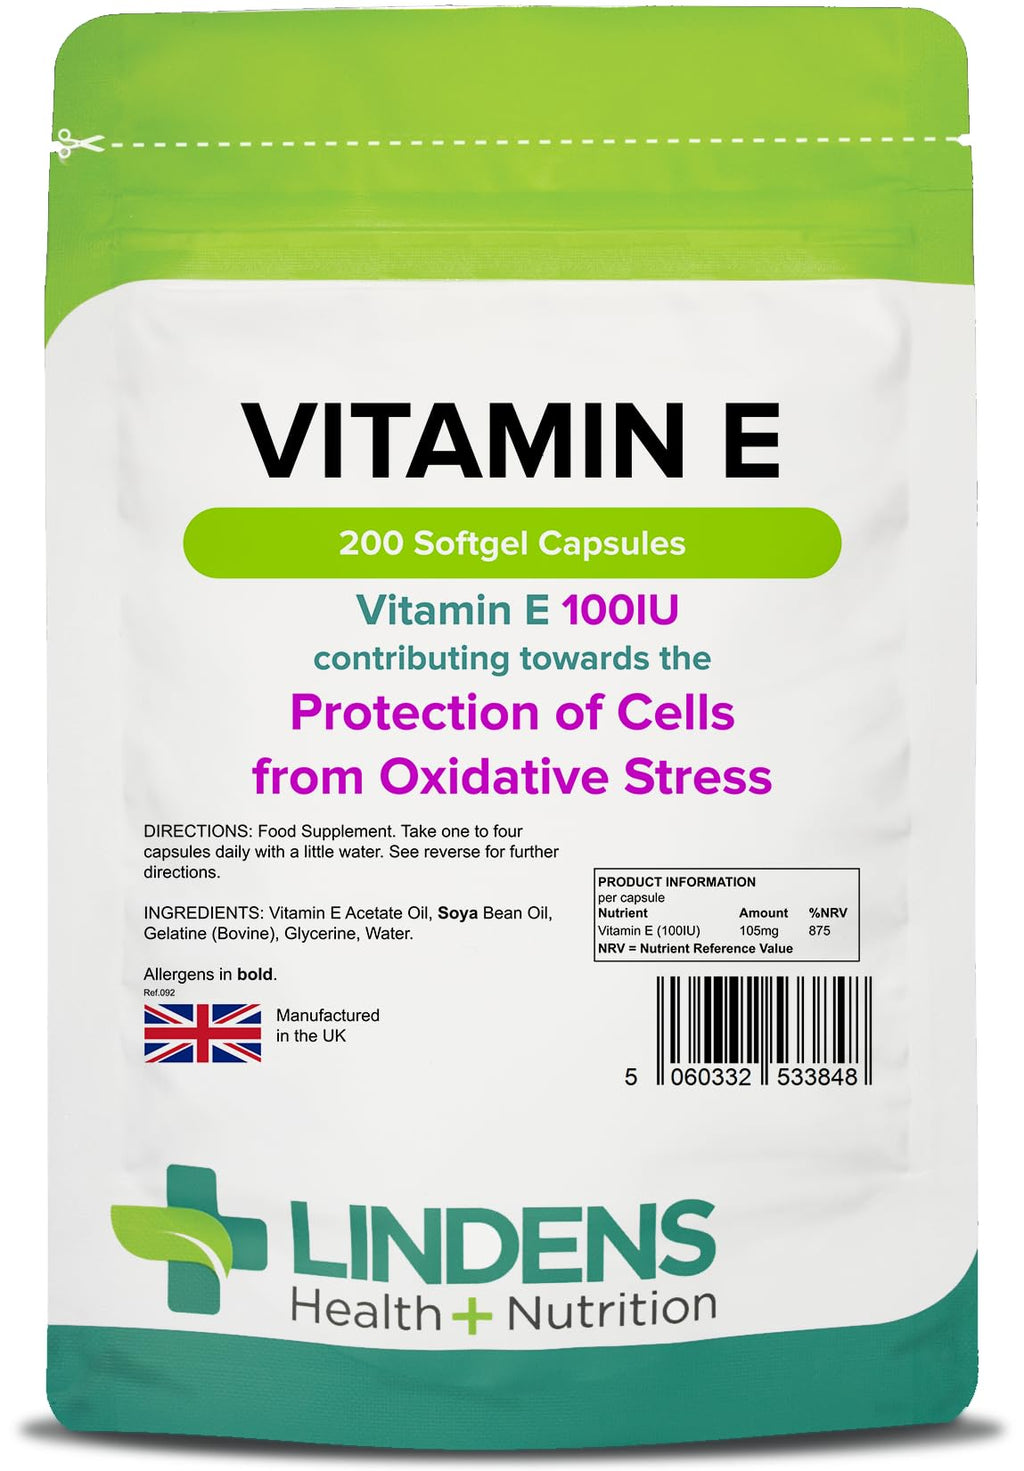 [Australia] - Lindens Vitamin E Oil 100IU - 200 Capsules - UK Made - Skin - Powerful Antioxidant | Protection of Cells from Oxidative Stress | Vitamin E Capsules | Letterbox Friendly 